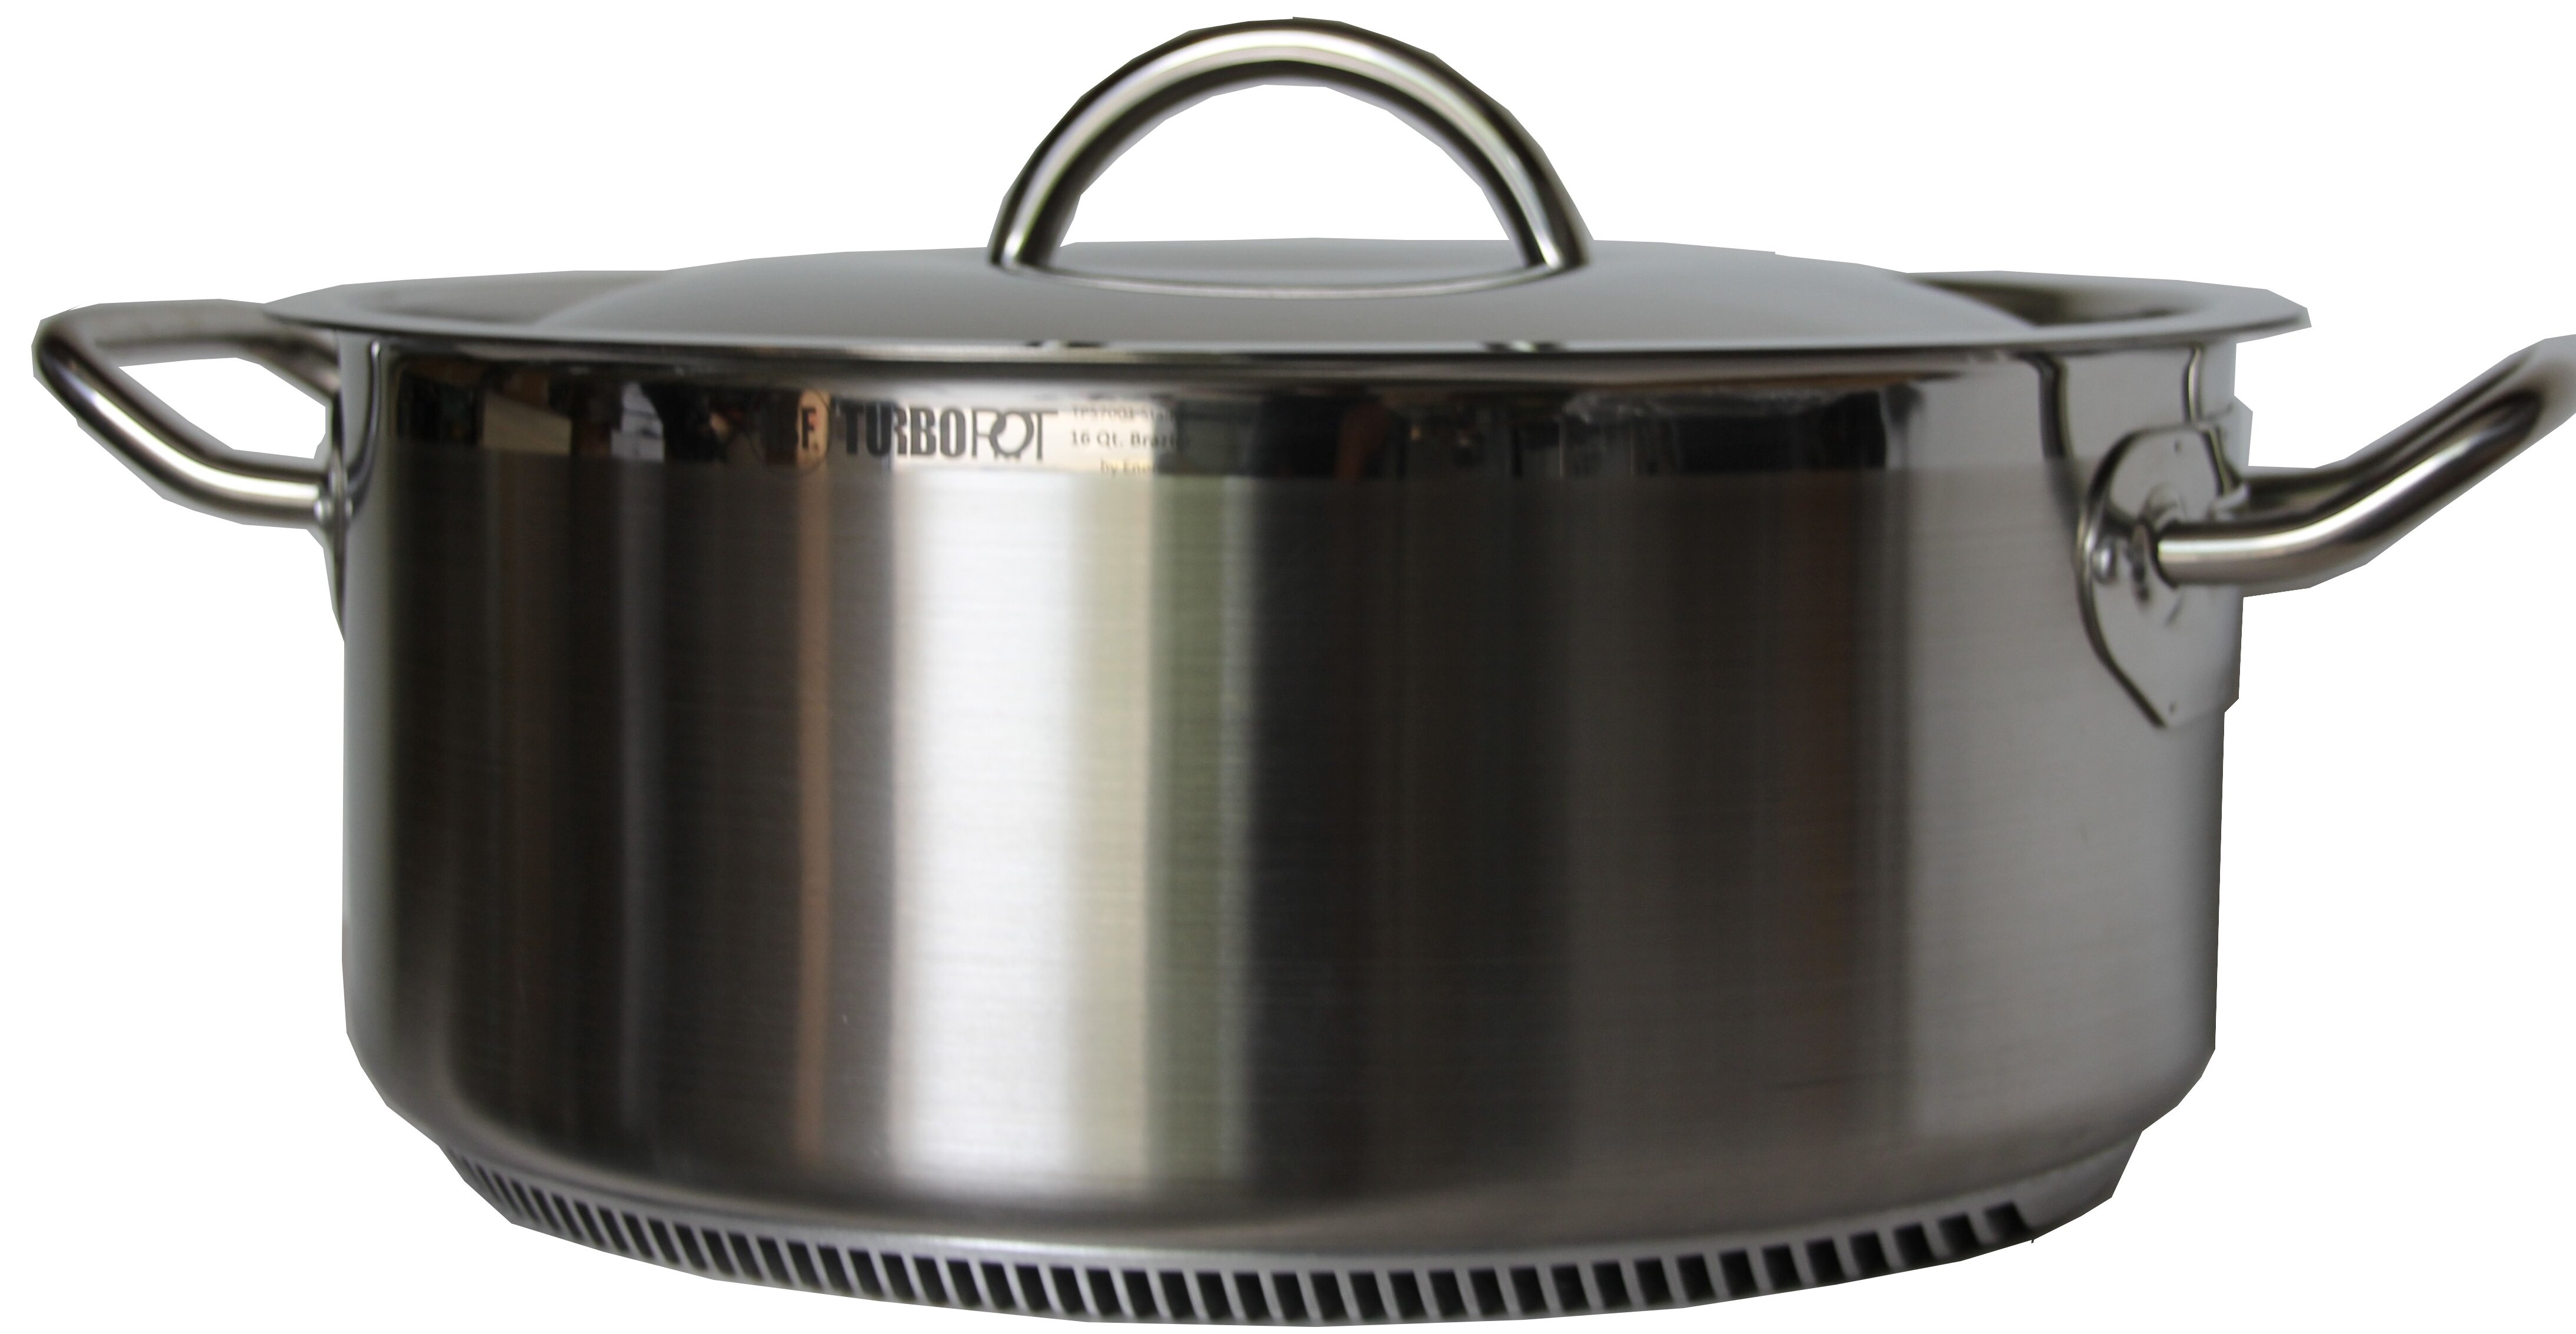 15qt All Clad Stainless Steel Braiser